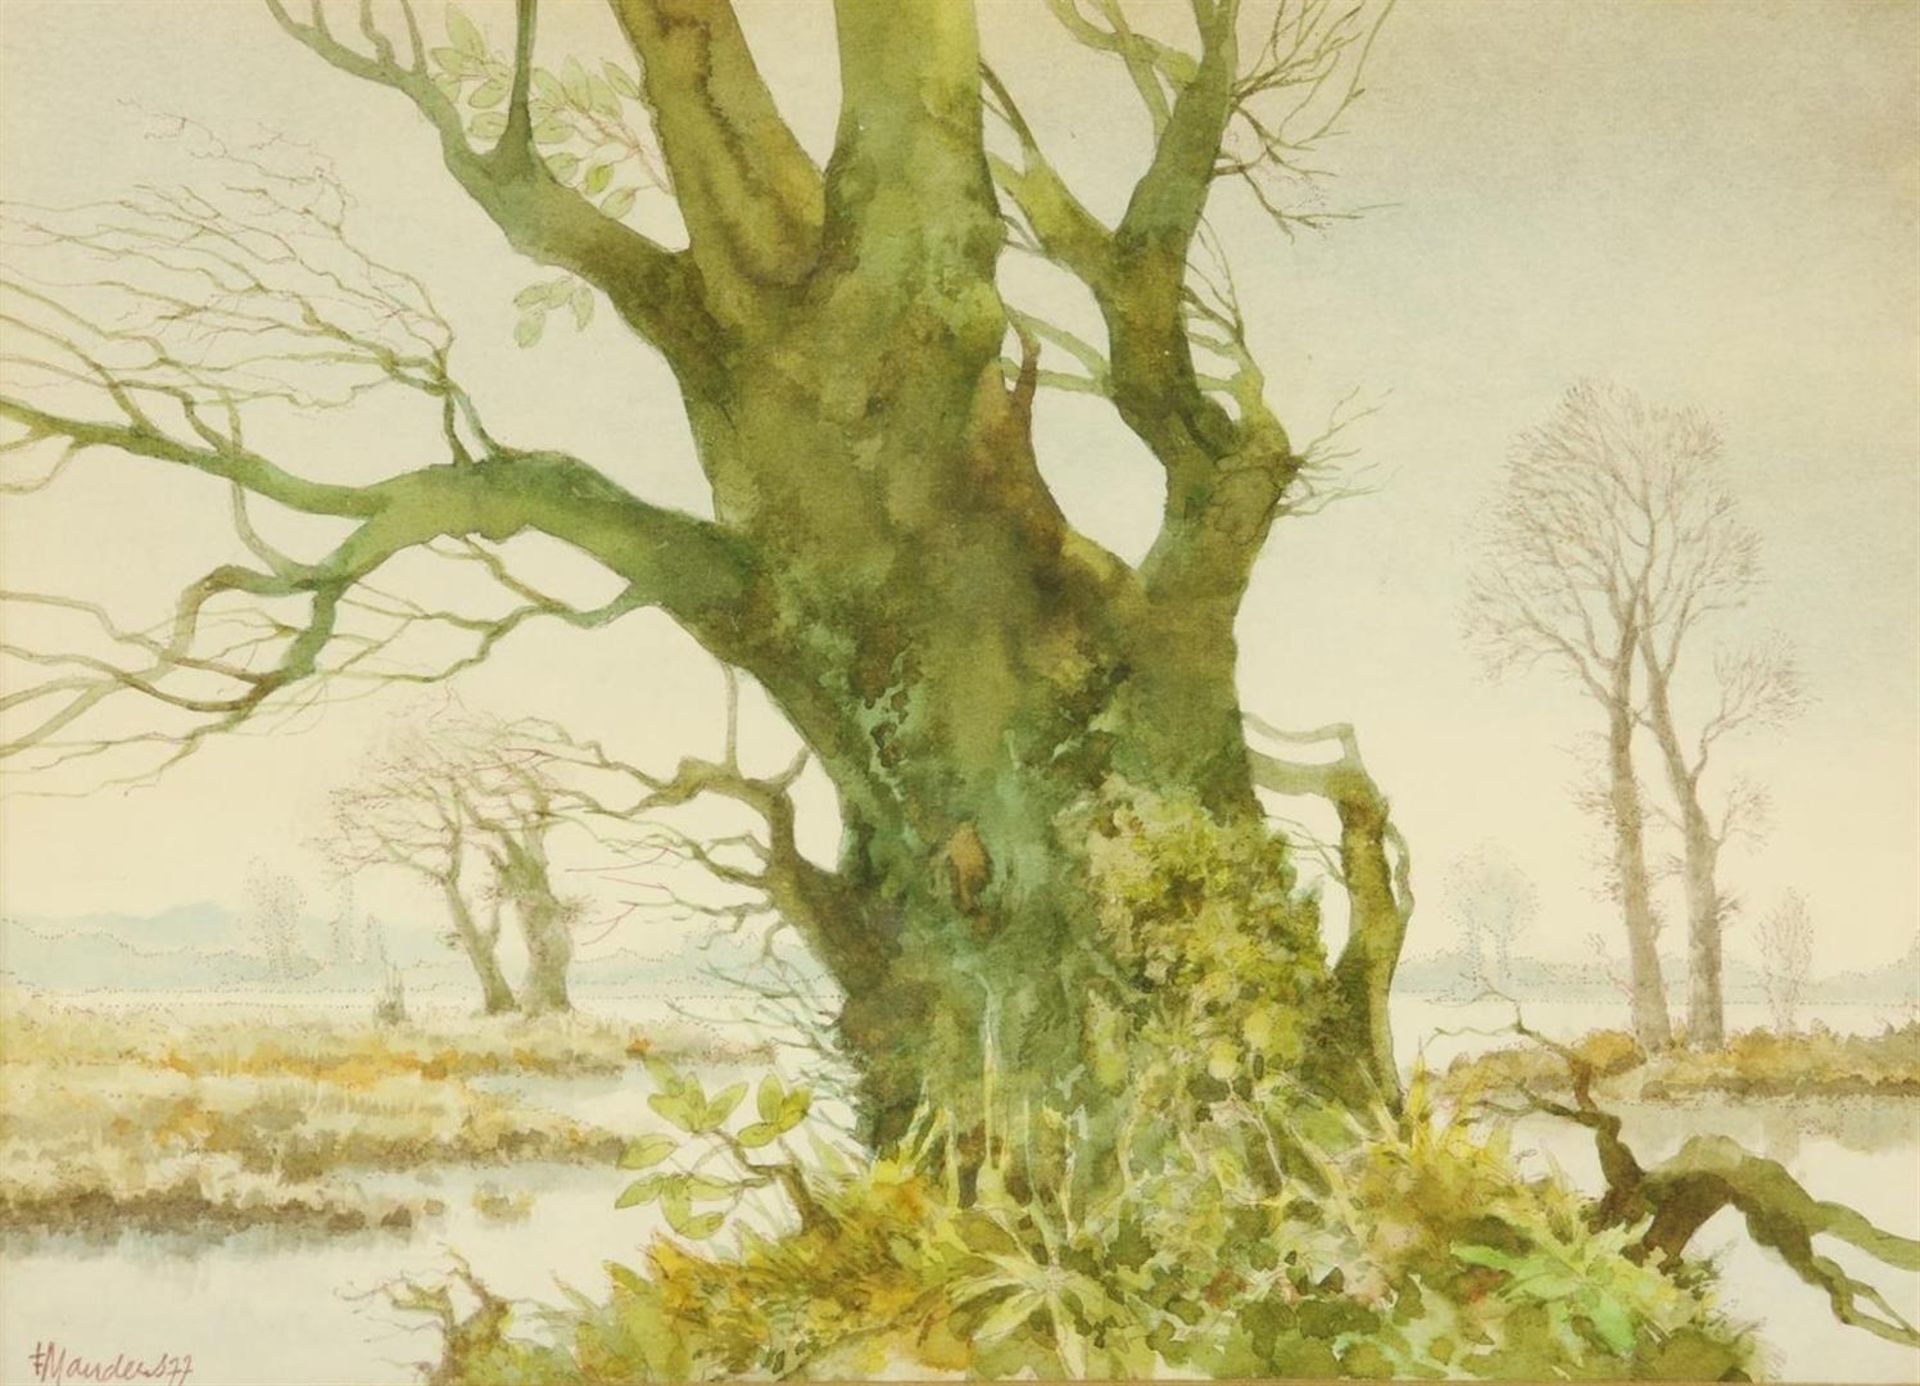 Frans Manders (1939-) Pollard willow in Dommelen, signed and dated '77 bottom left, watercolor on